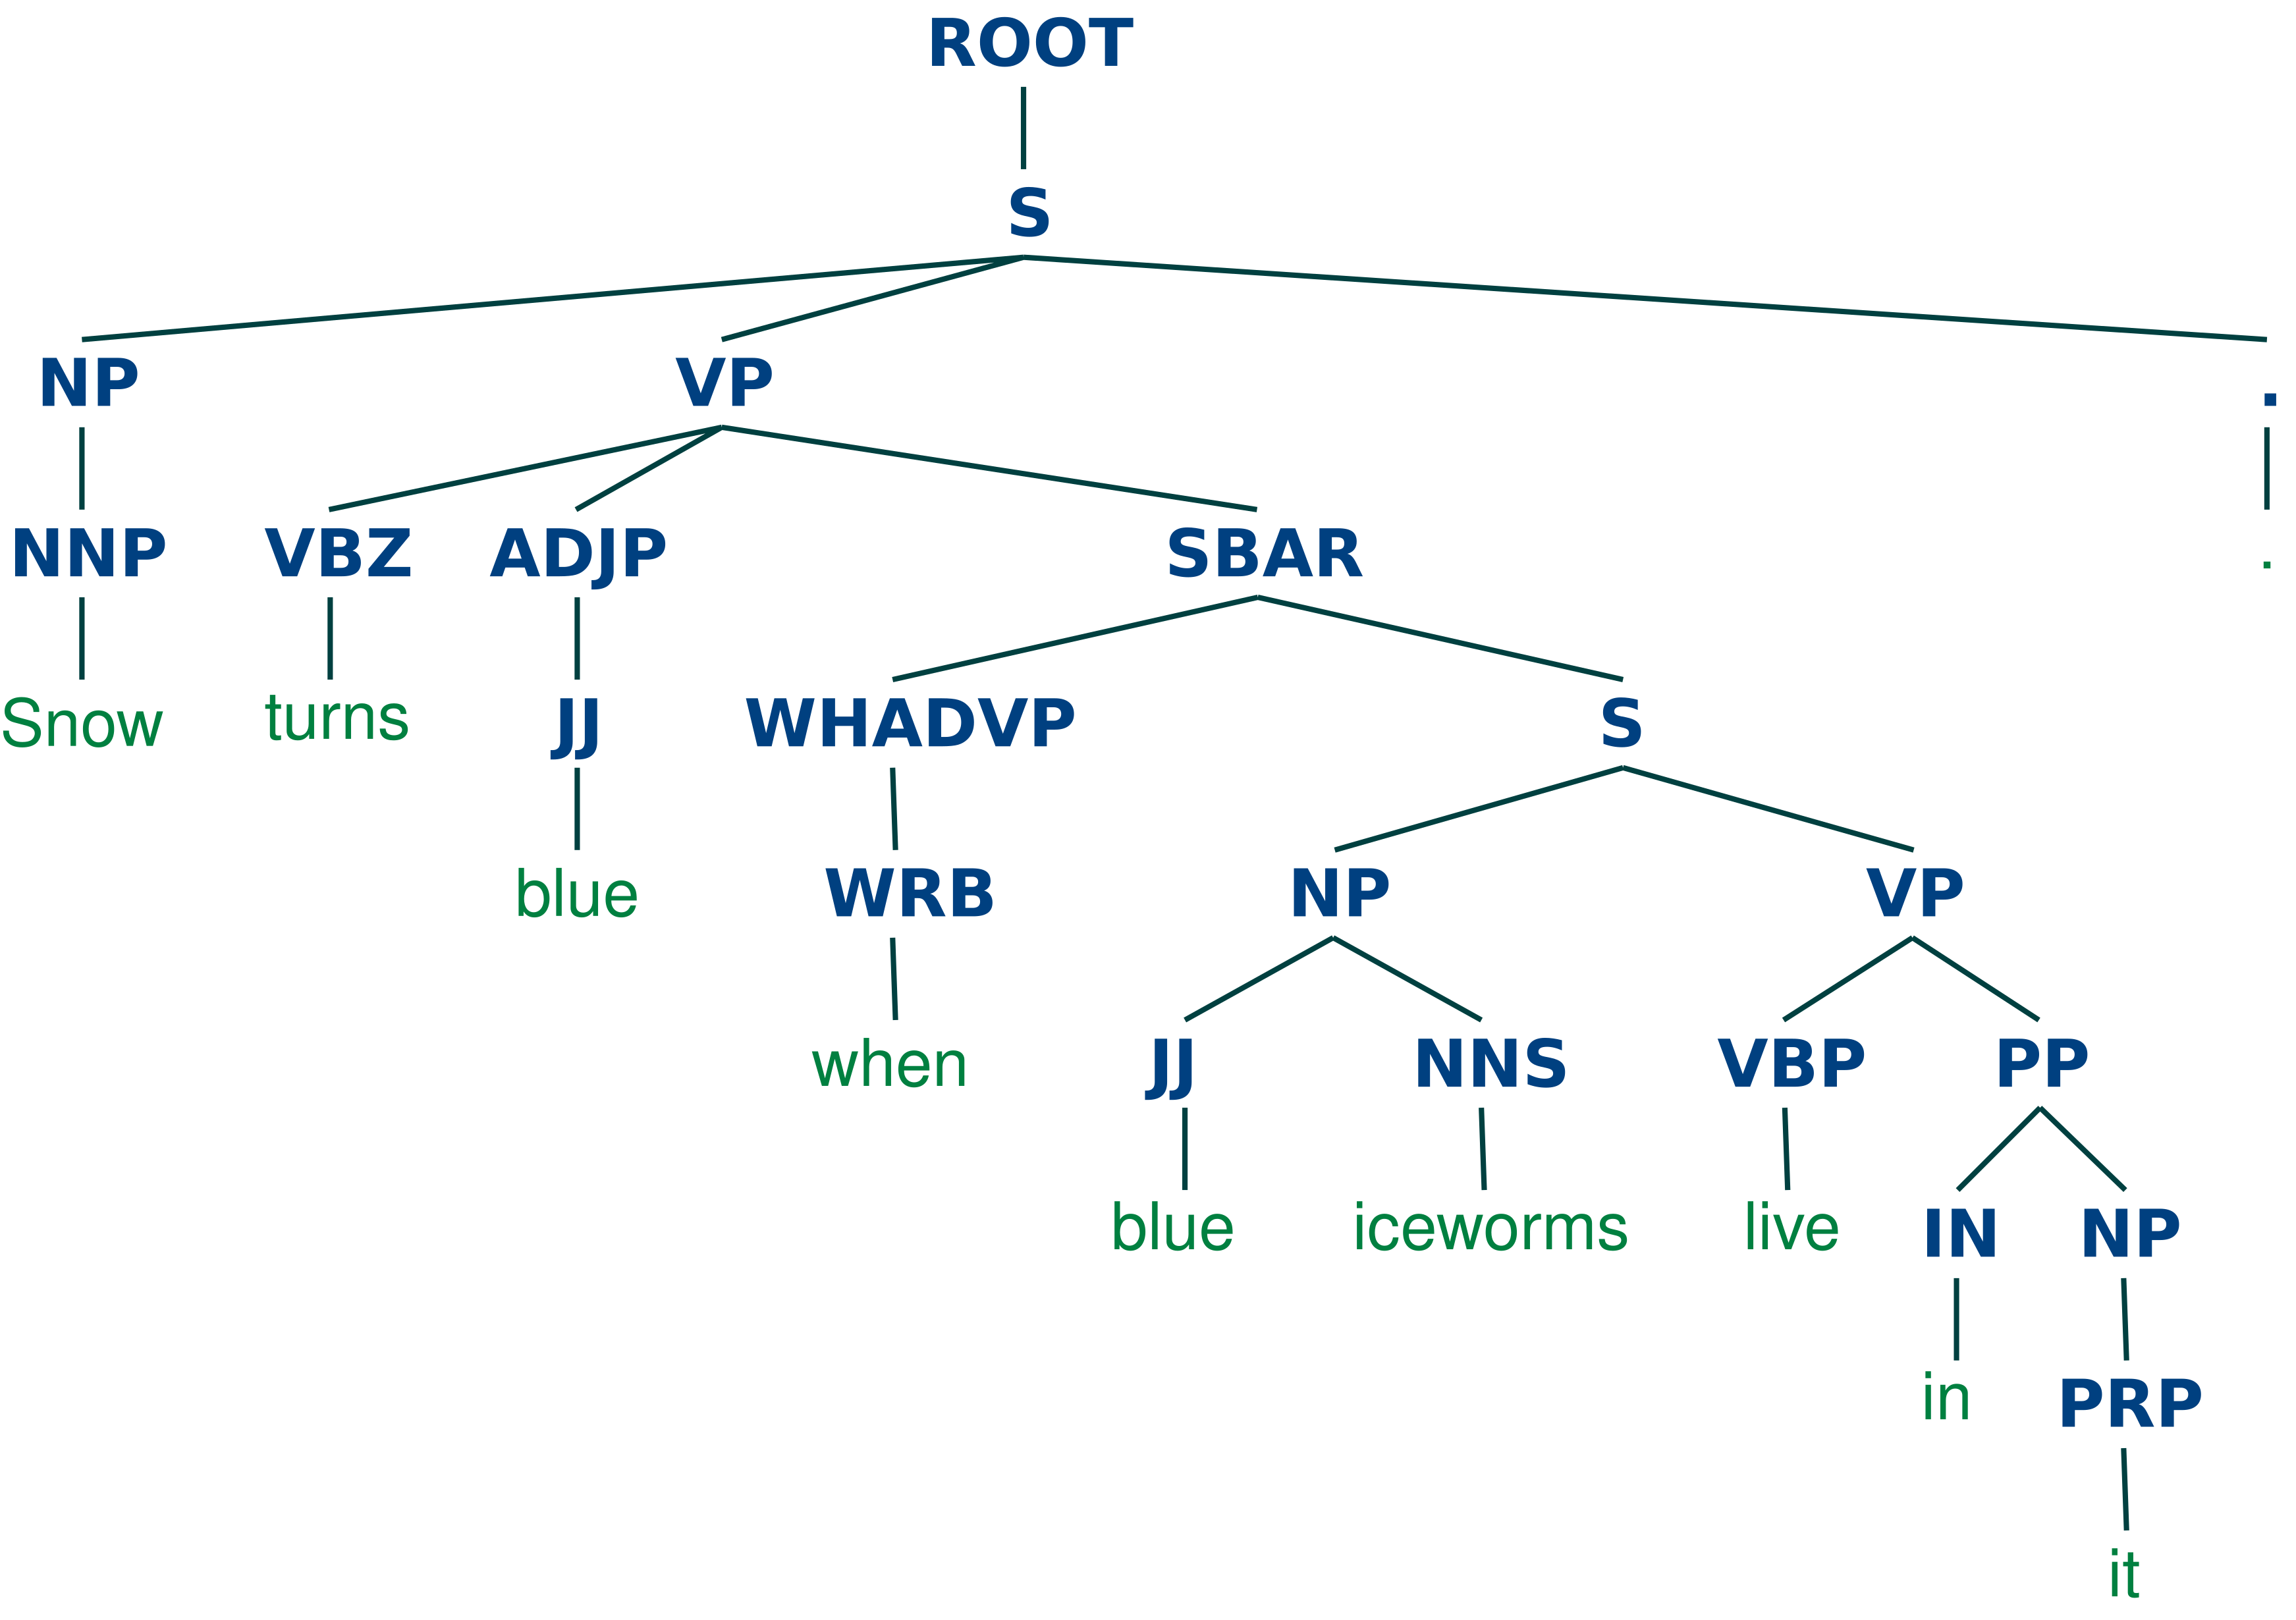 A context free grammar parse tree parsing the sample sentence into different constituents.